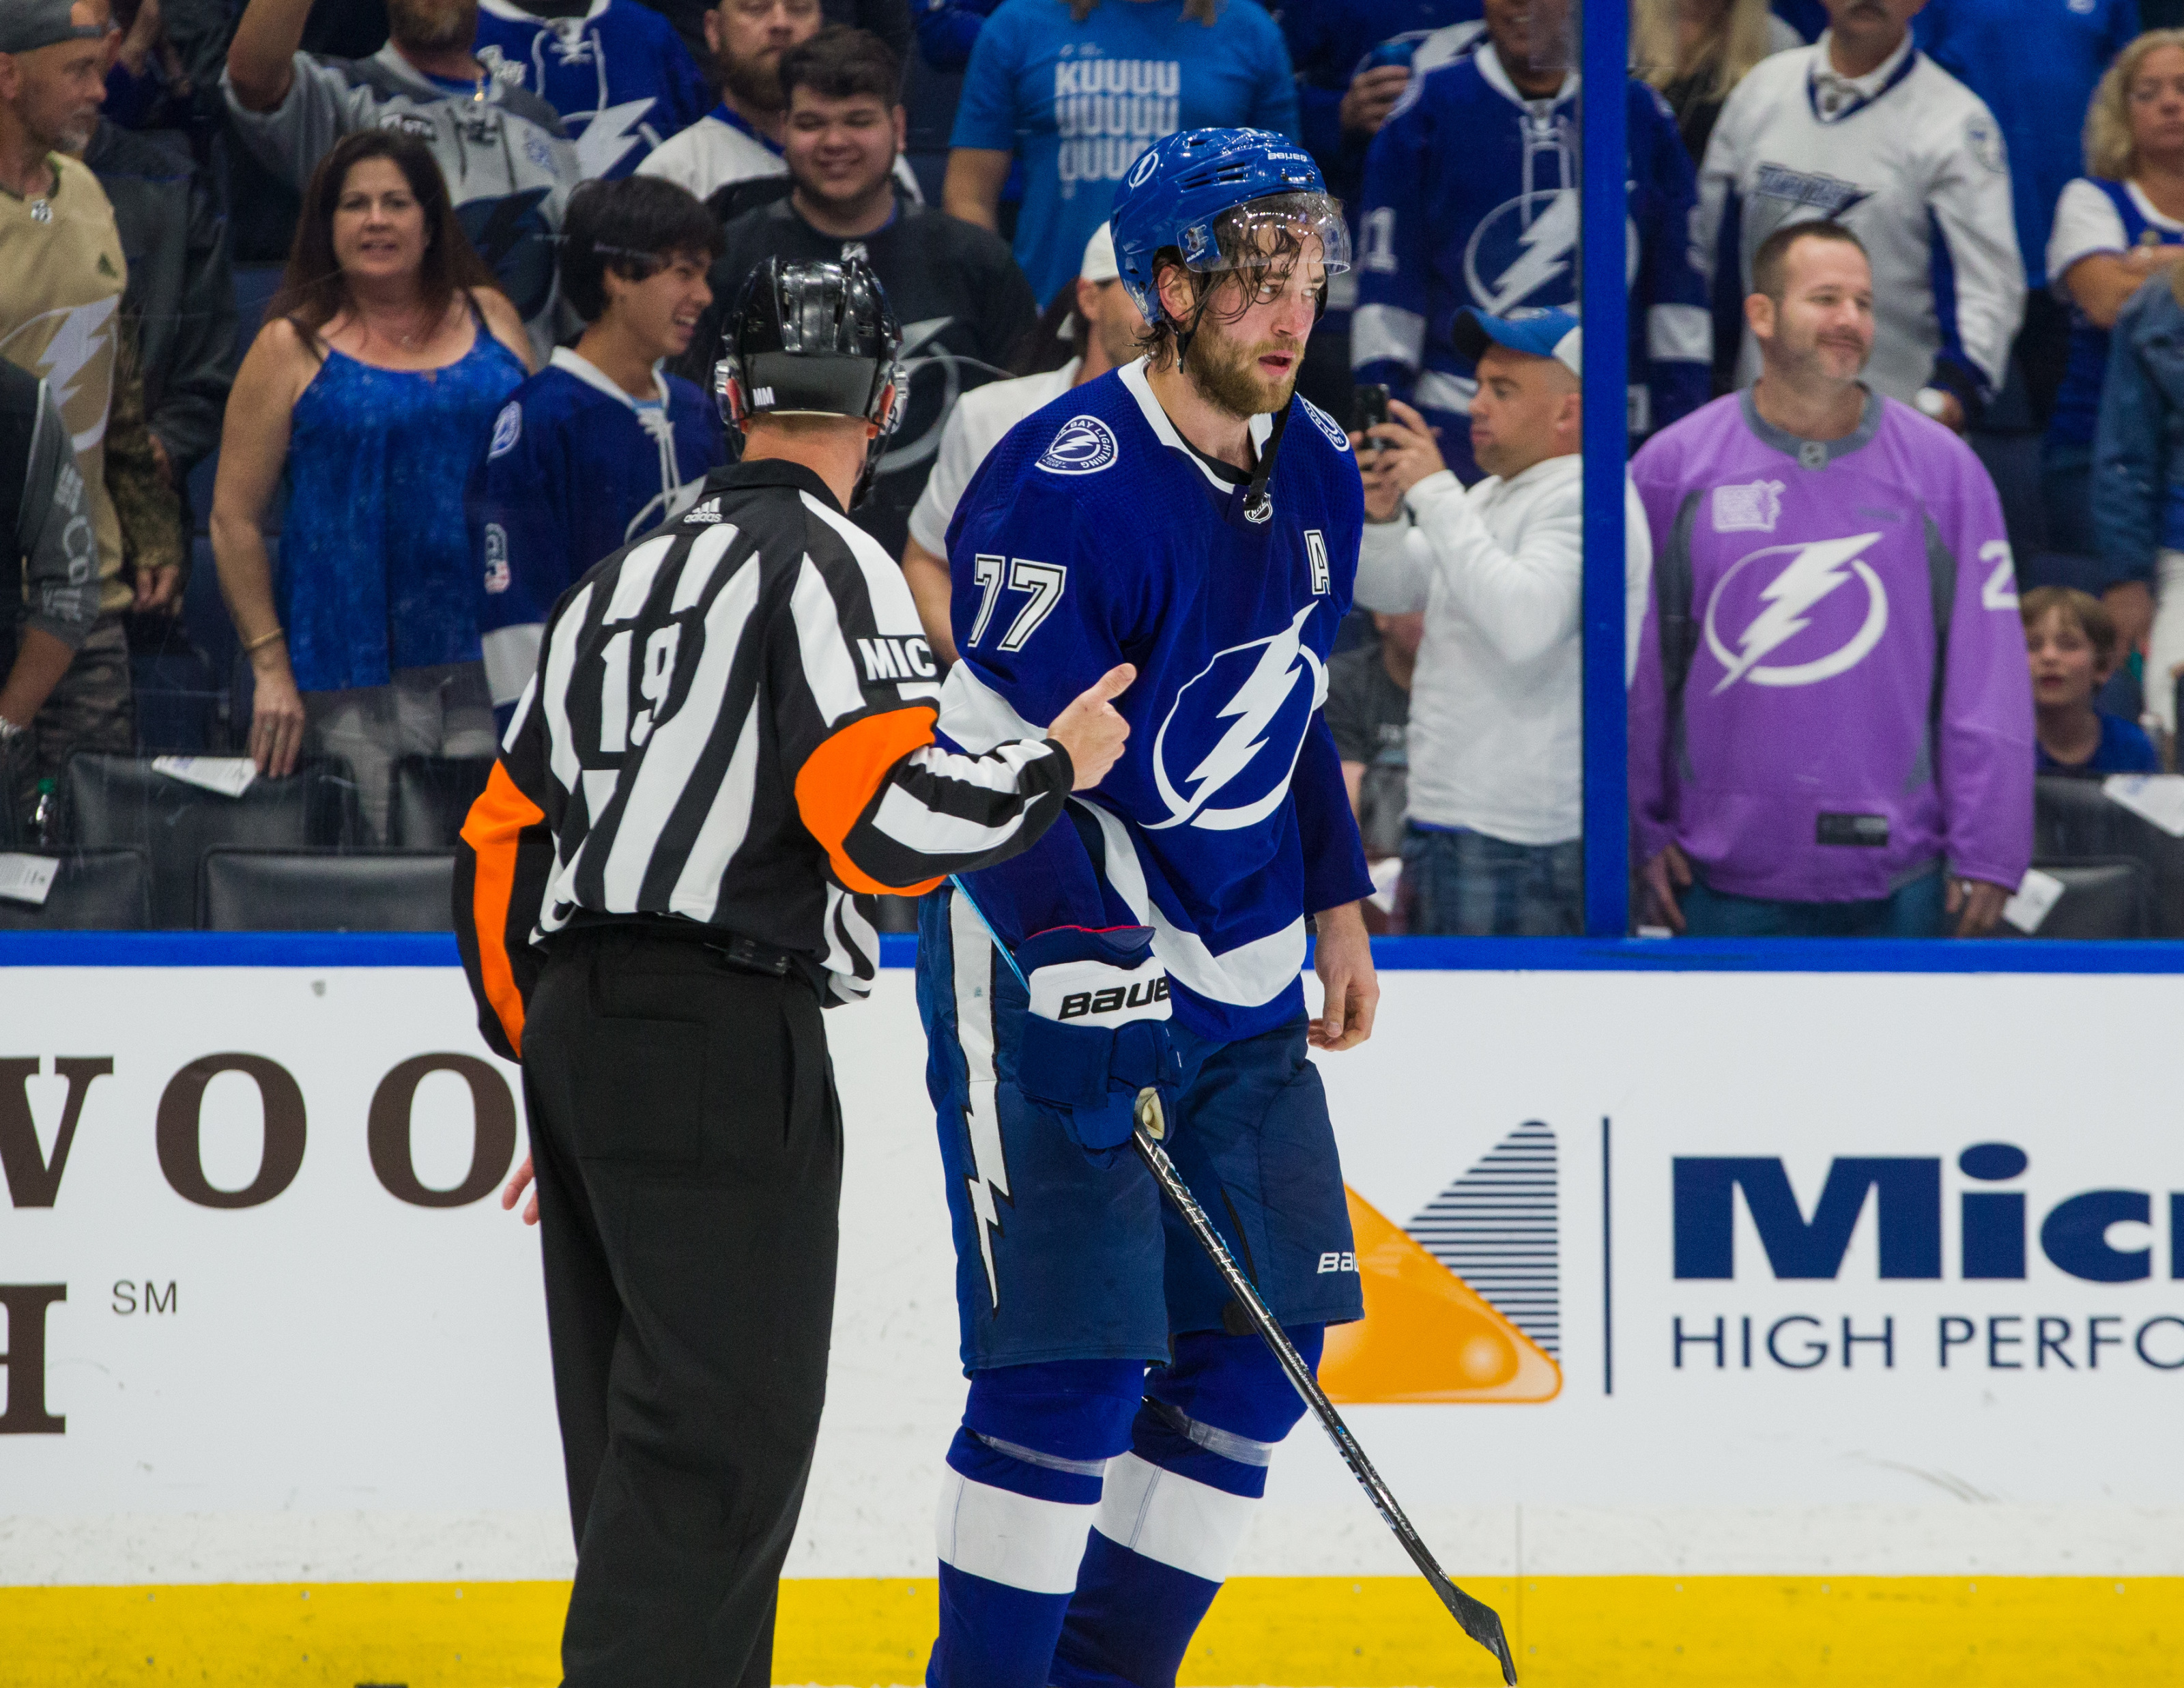 Tampa Bay Lightning's second straight Stanley Cup season commemorated